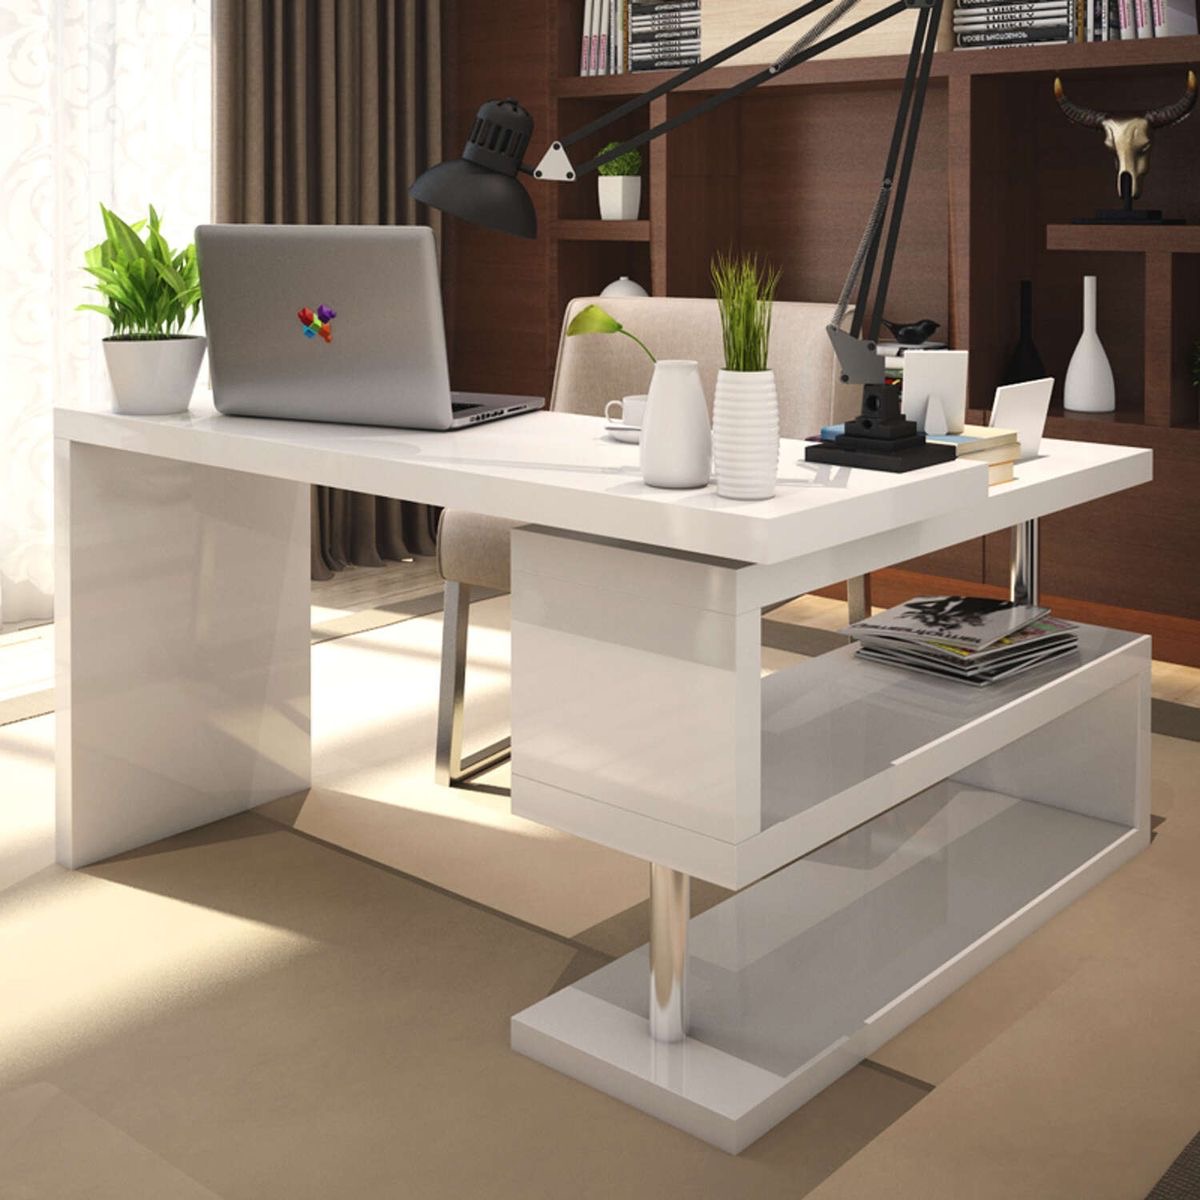 Office%20table%20Design%20images%20(10)